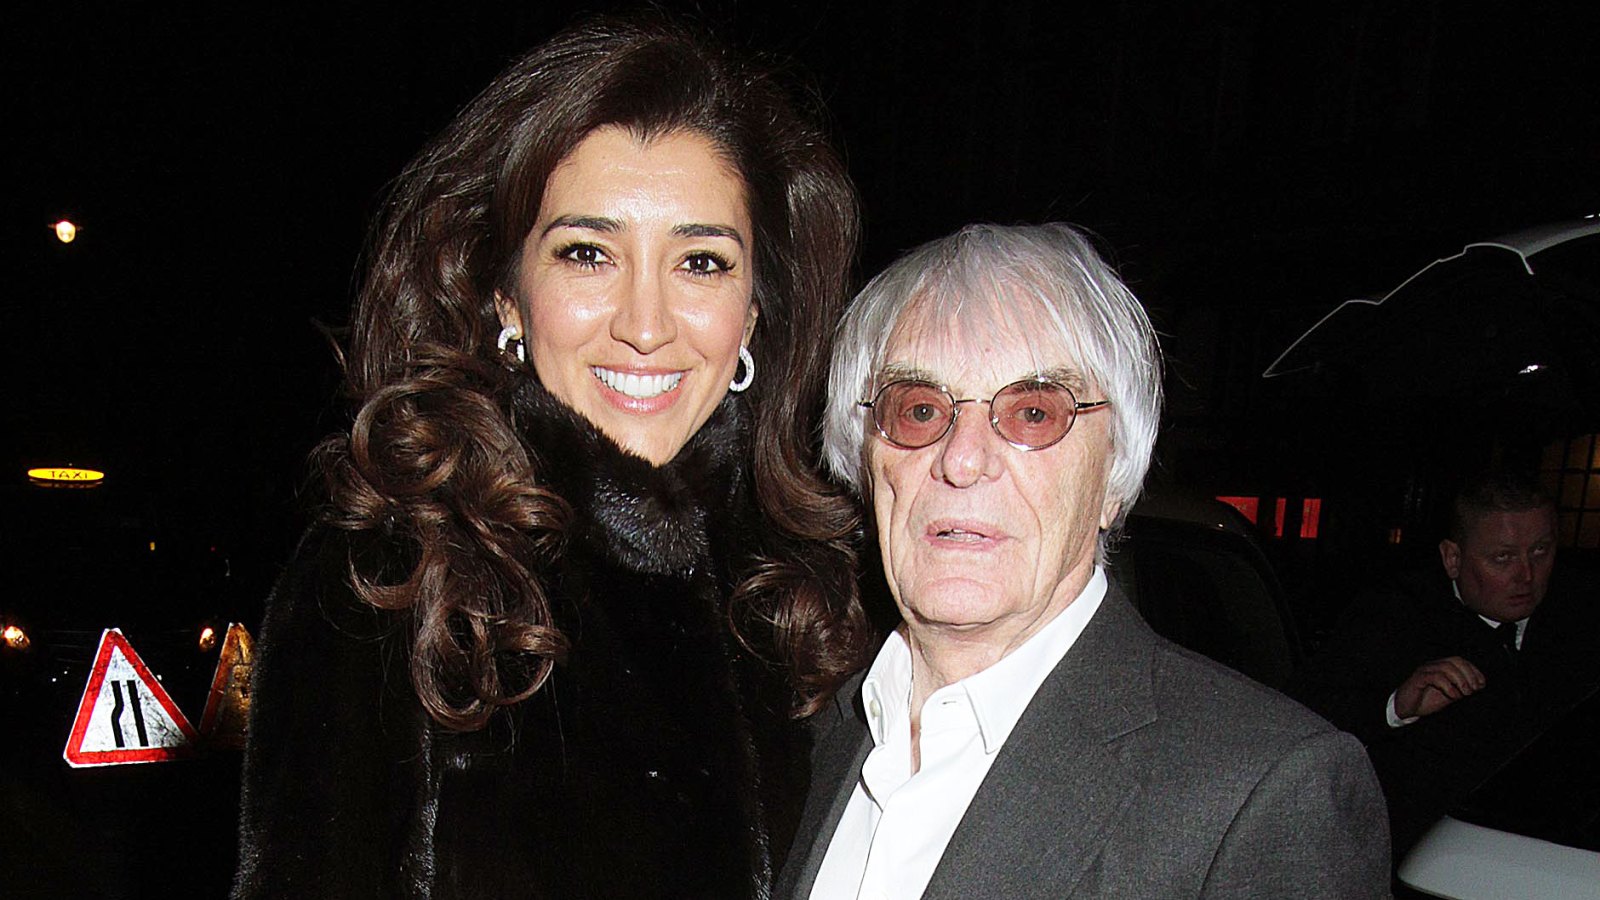 Bernie Ecclestone Is Expecting His 1st Child With His 44-Year-Old Wife Fabiana Flosi